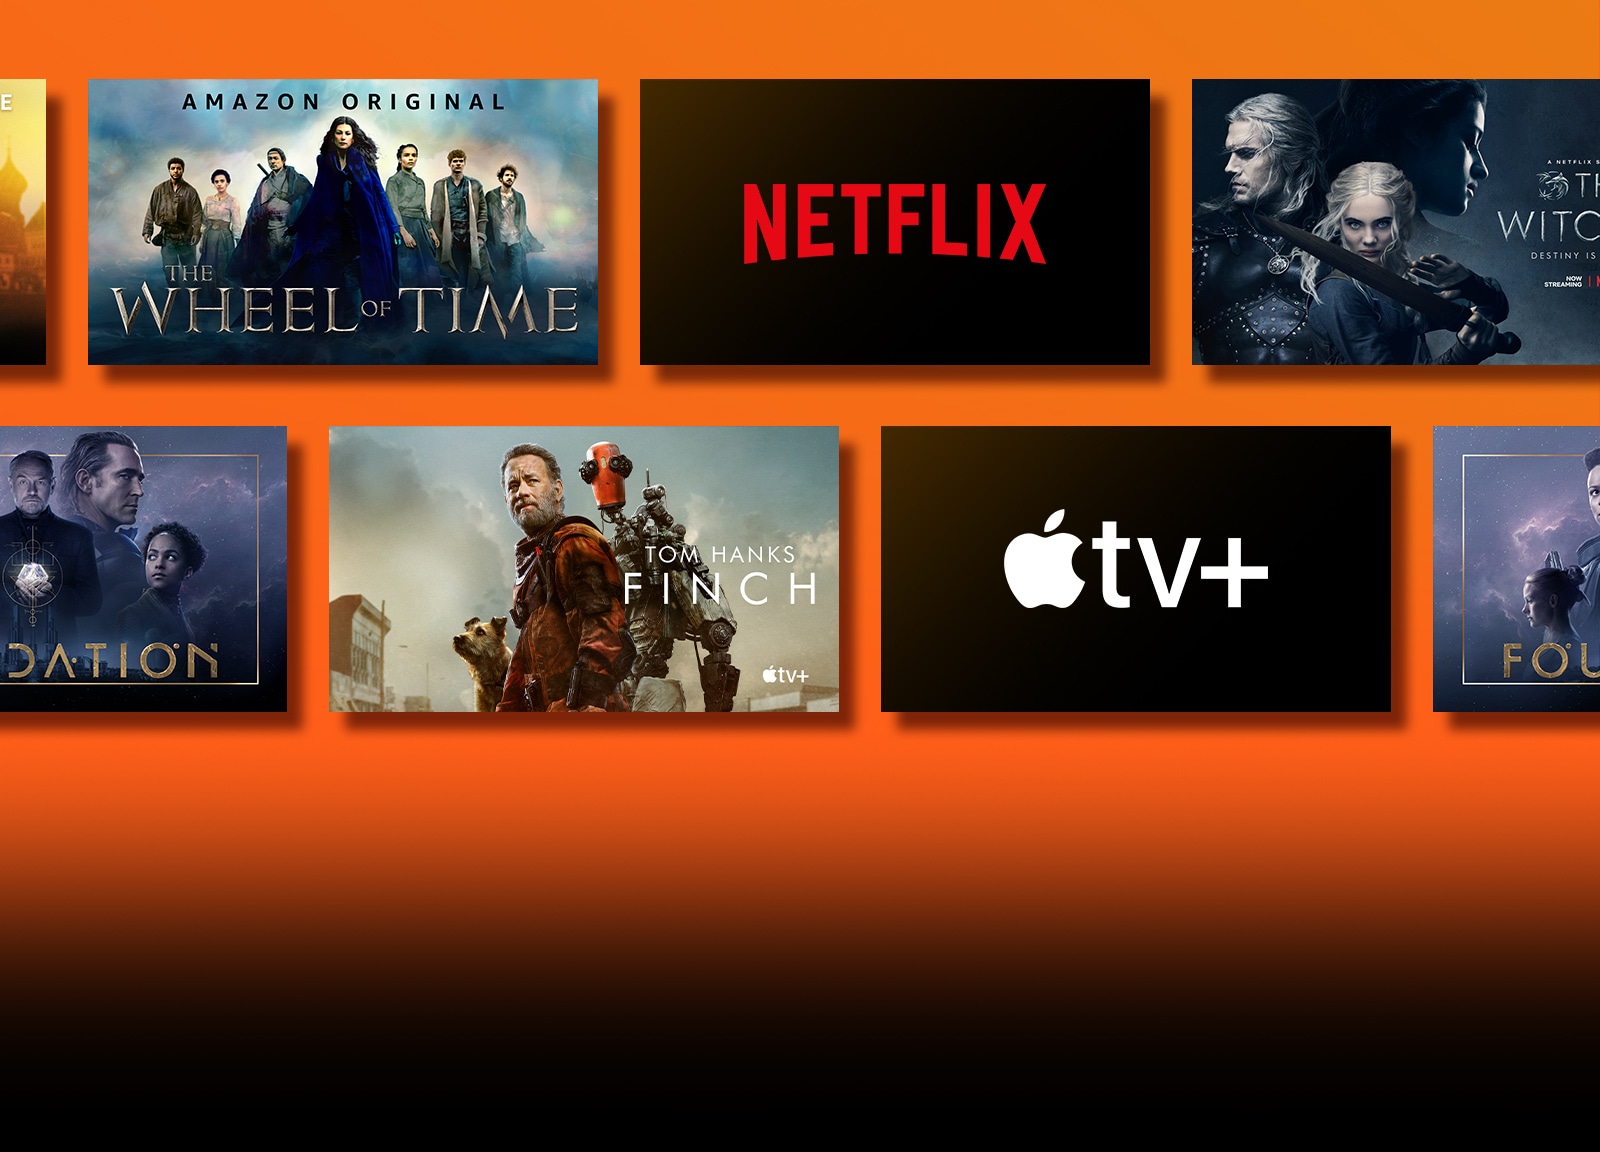 There are logos of streaming service platforms and matching footages right next to each logo. Netflix logo and money heist and the Witcher. Prime Video logo and Without Remorse and The Wheel of Time. Livenow logo and mamamoo teaser image and OneUs teaser image. Apple TV plus logo and Foundation and Finch. 